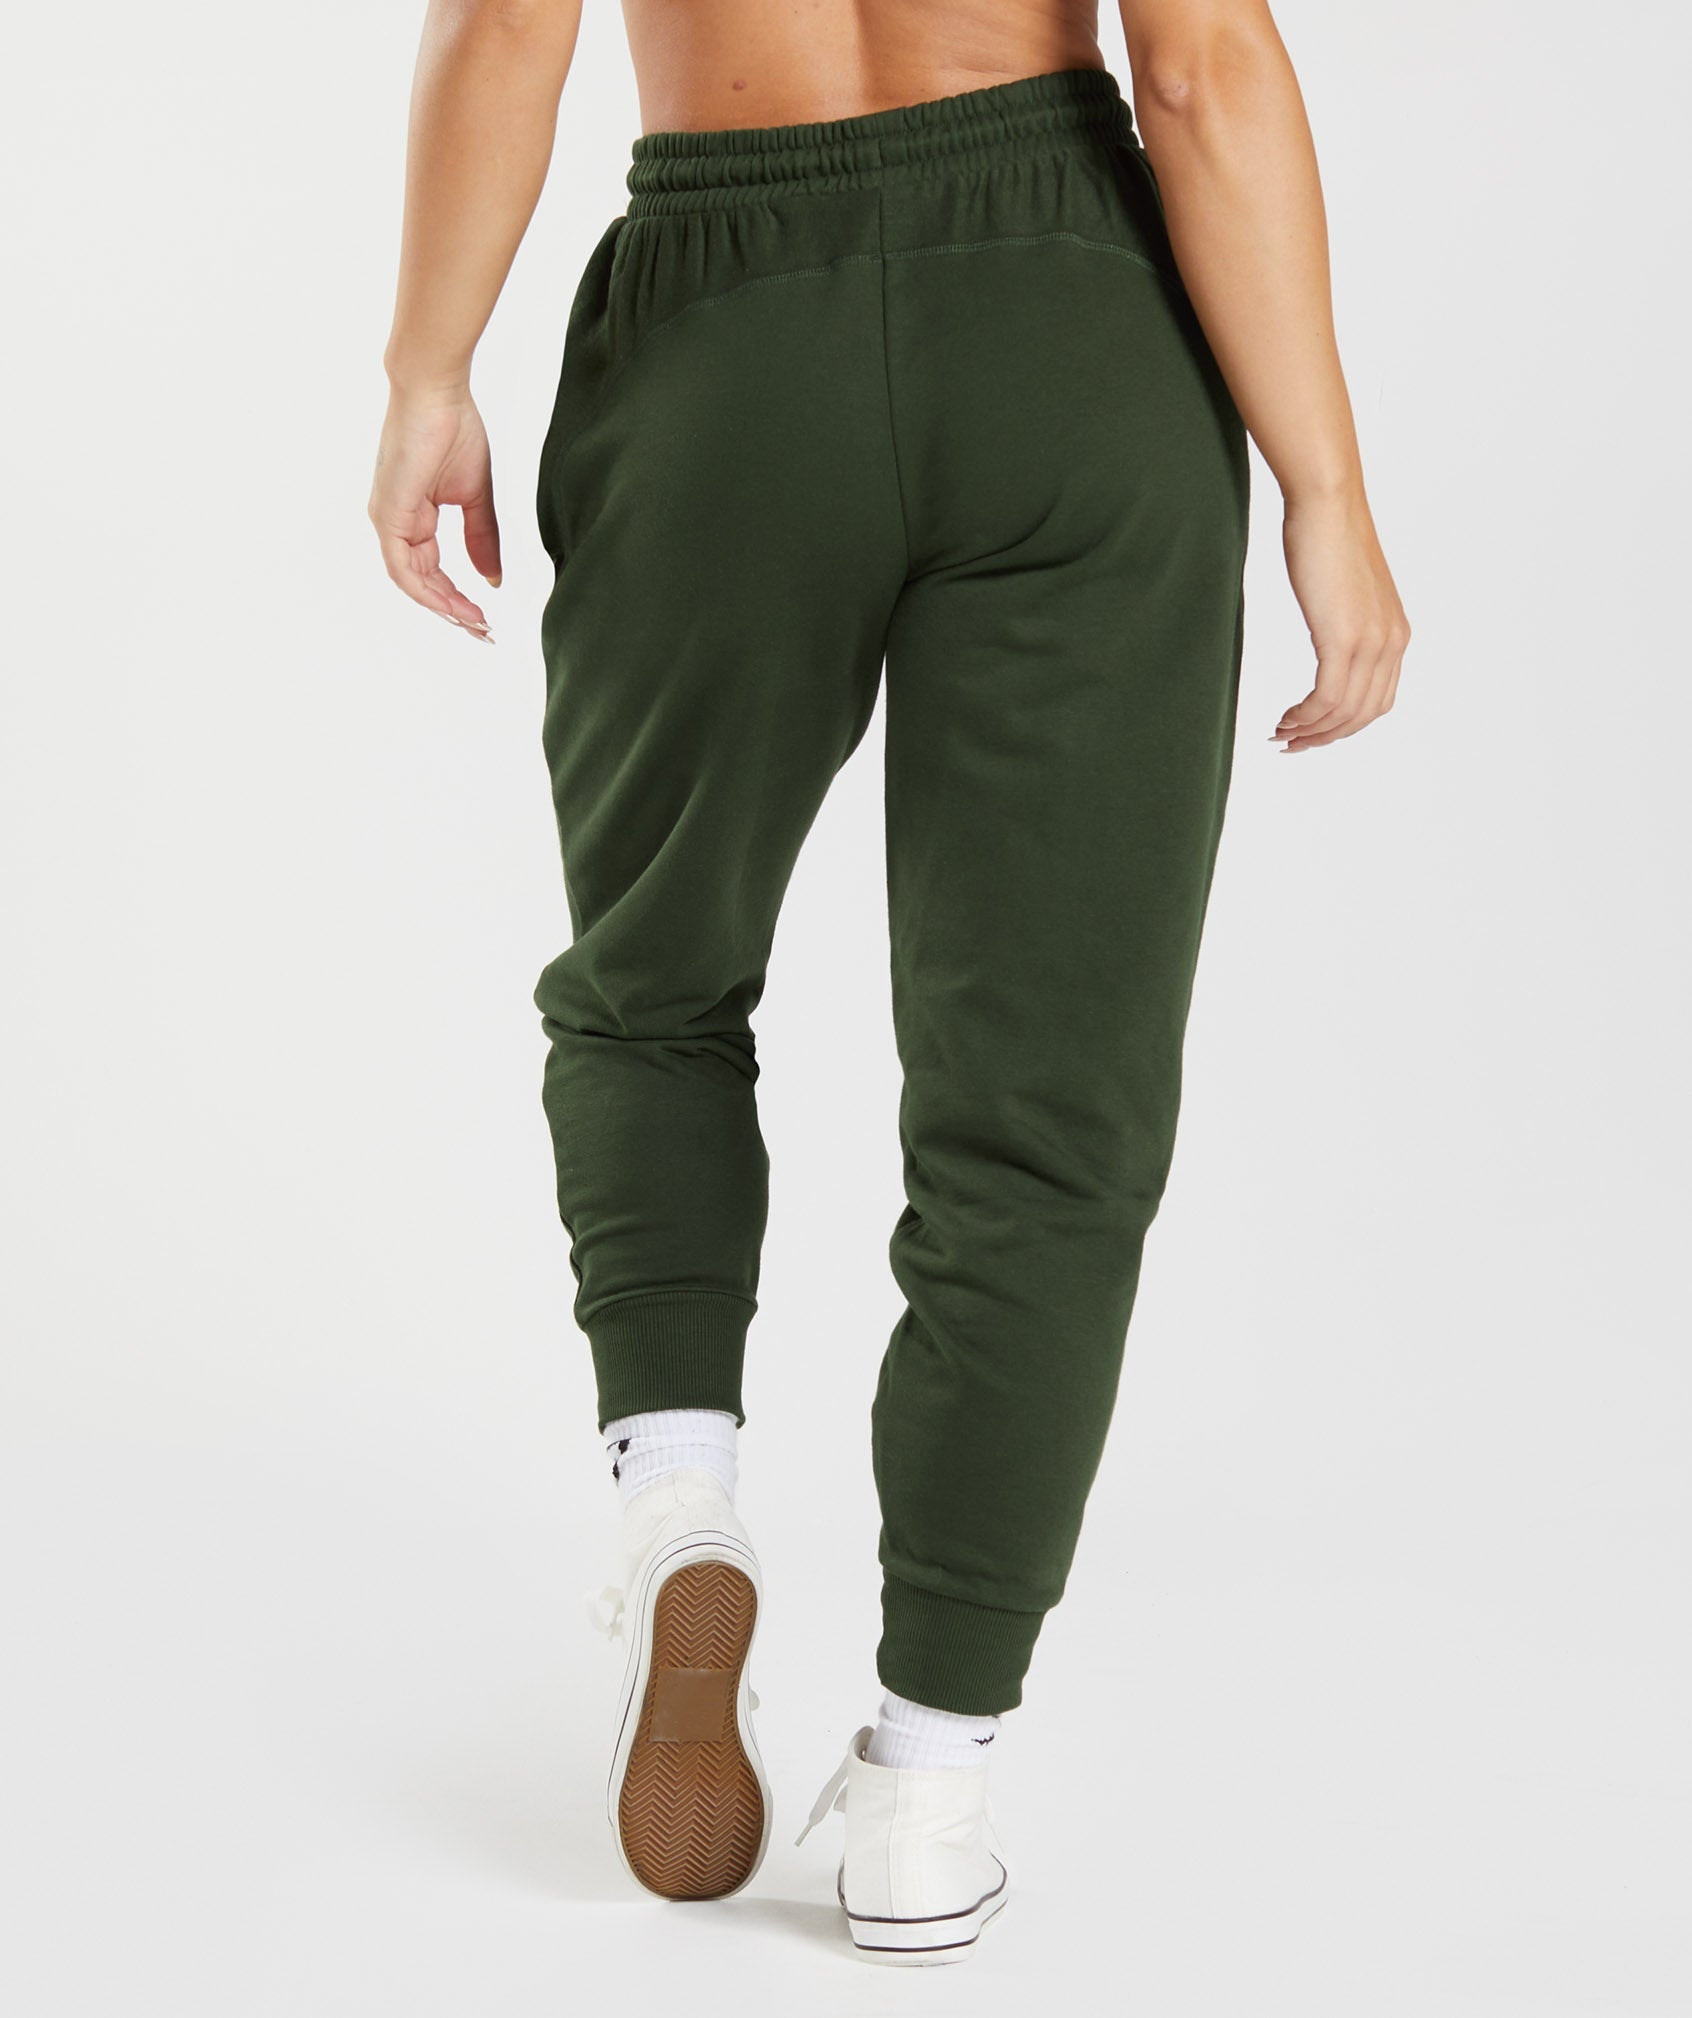 GS Power Joggers in Moss Olive - view 2